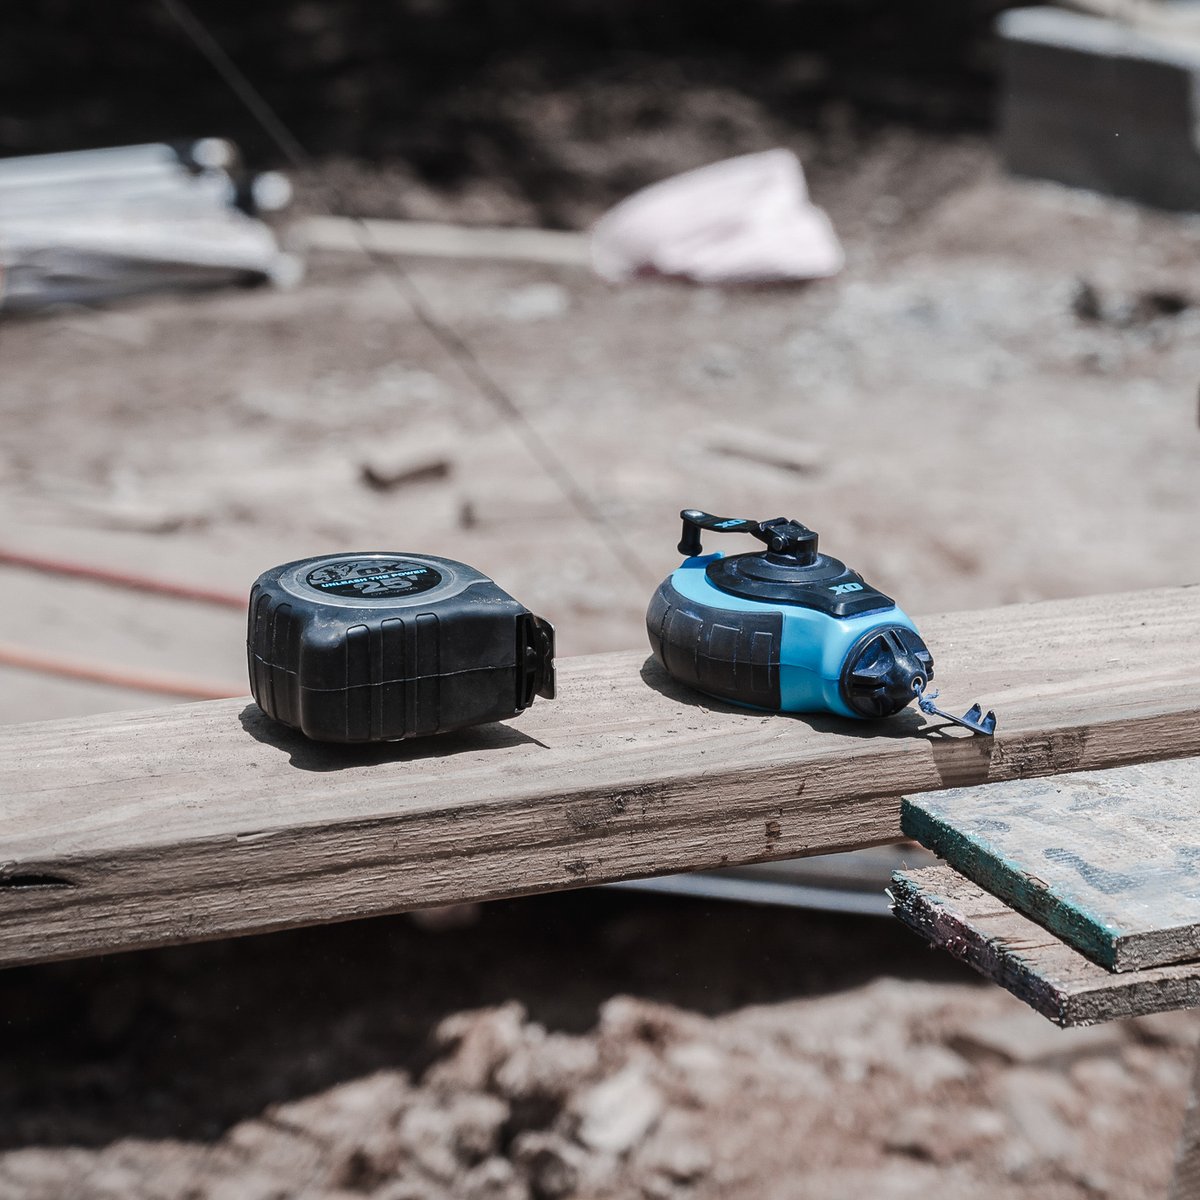 OX Tools hard at work on the framing site. 

#oxtools #ox #tools #handtools #framing #framingtools #framingcontractors #contractors #construction #texas #wood #lumber #timber #stickframing #chalk #tapemeasure #layout #jobsite #bluecollar #blue #build #tough #dynamic #different